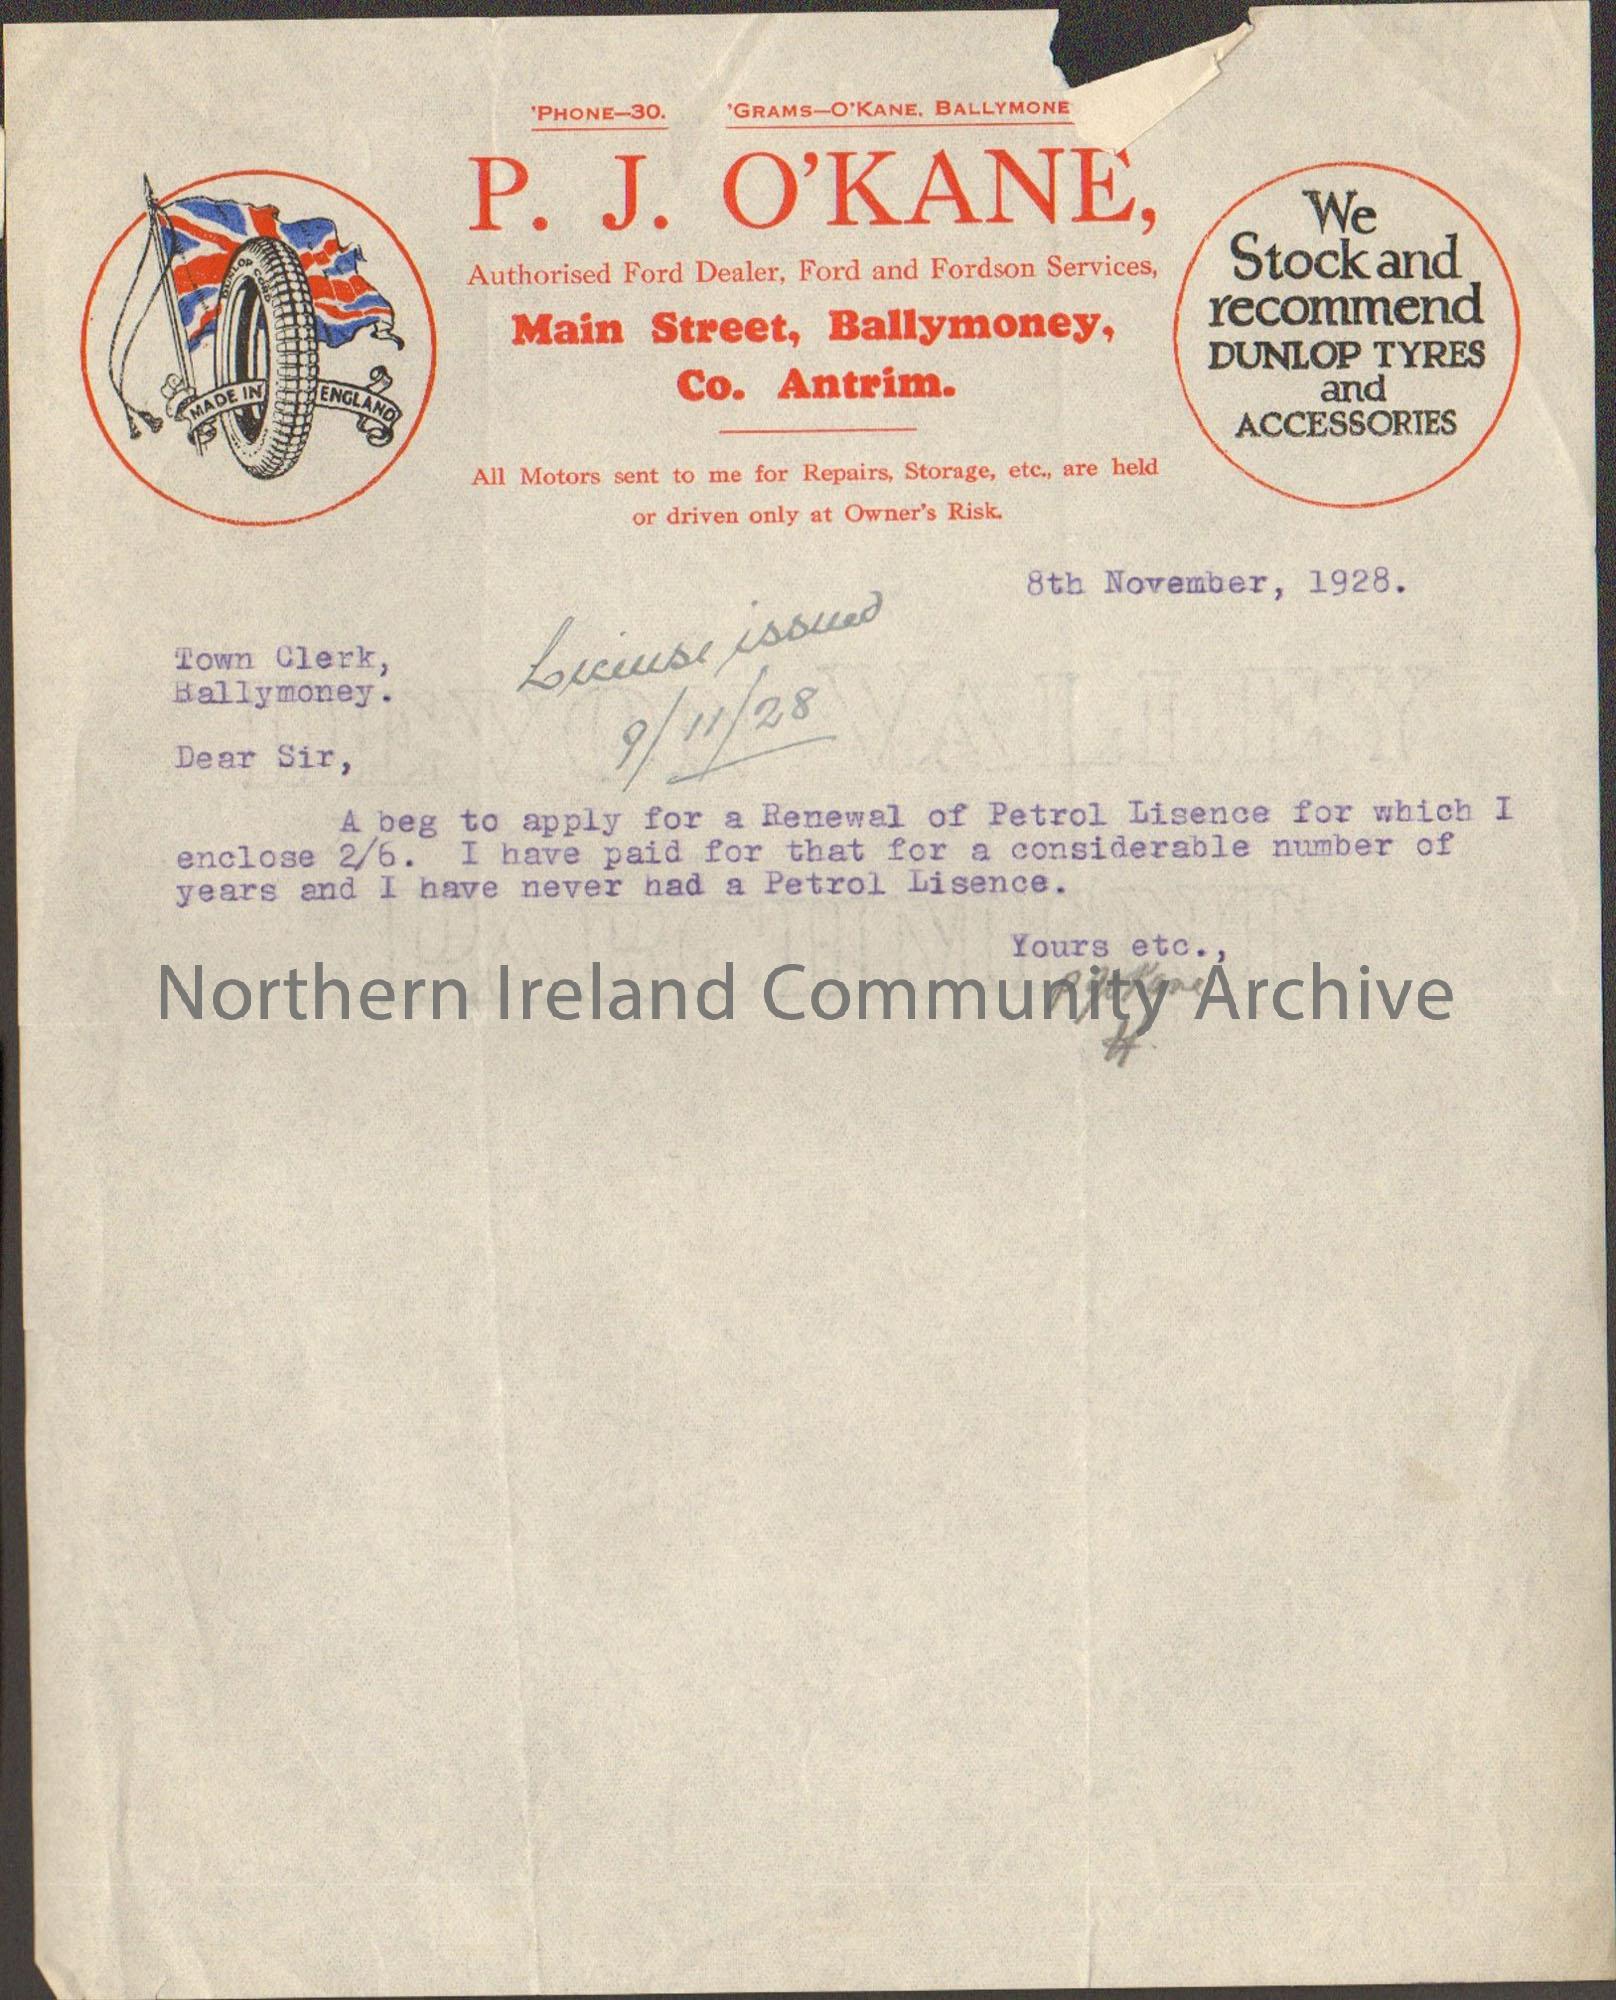 Letter with purple type from P. J. O’Kane, Authorised Ford Dealer applying to renew their petrol license